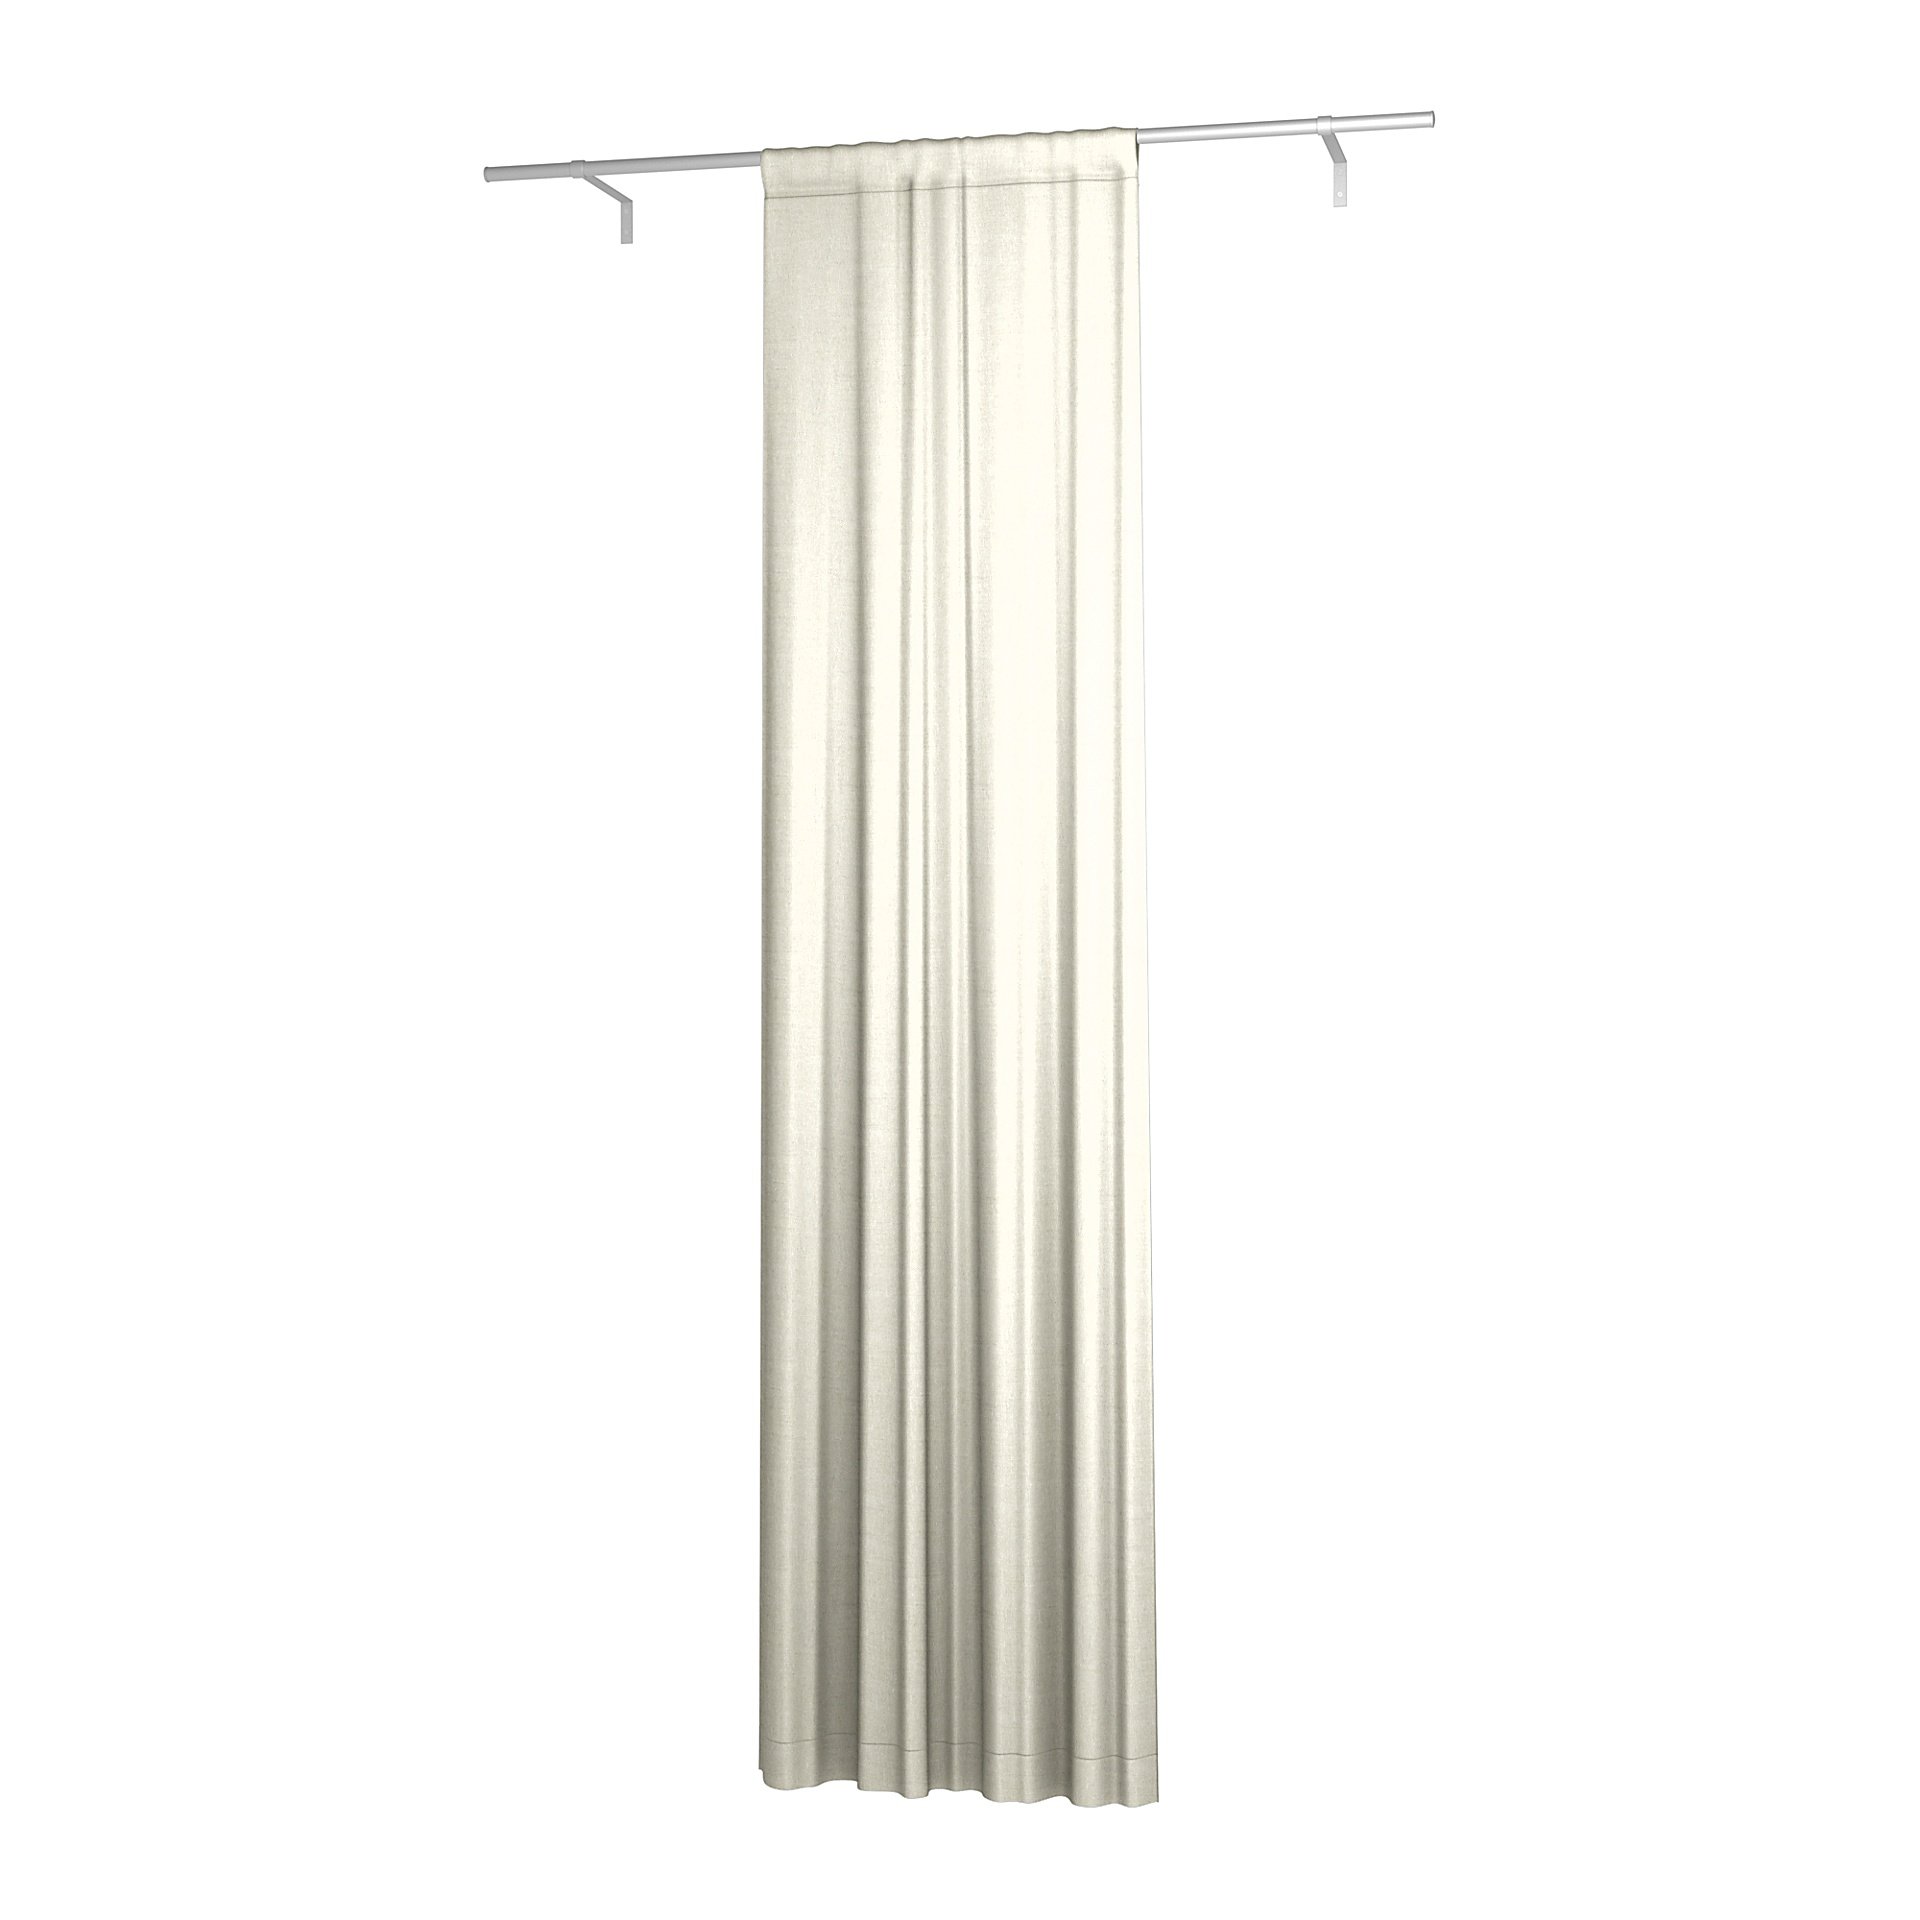 Single Width Curtain Panel with Tunnel/Creaseband, Lined, 300 cm, Natural, Linen - Bemz